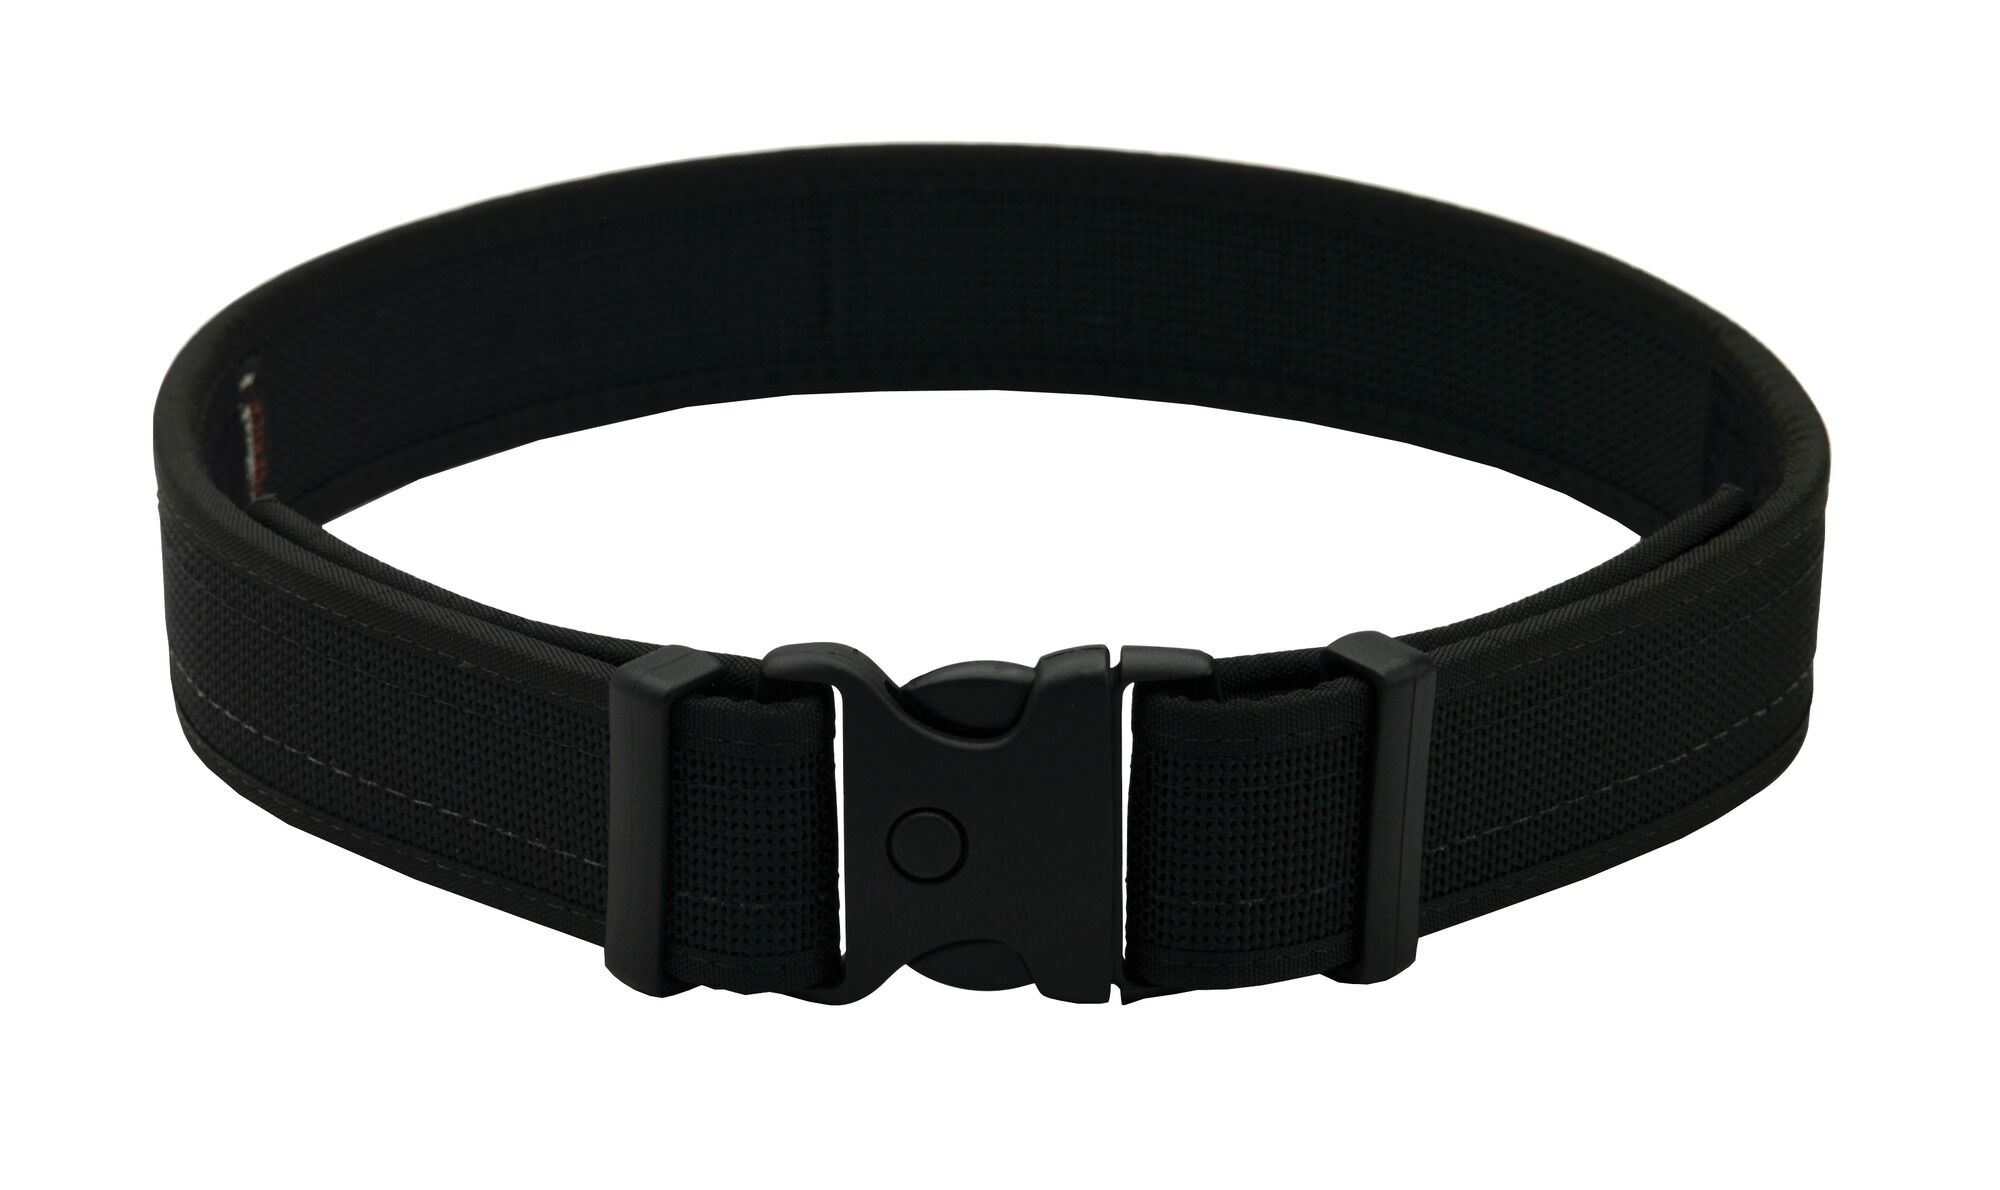 Uncle Mikes Nylon 2 Inch Web Deluxe Duty Belt Medium 32 to 36 Inch Black 88011 